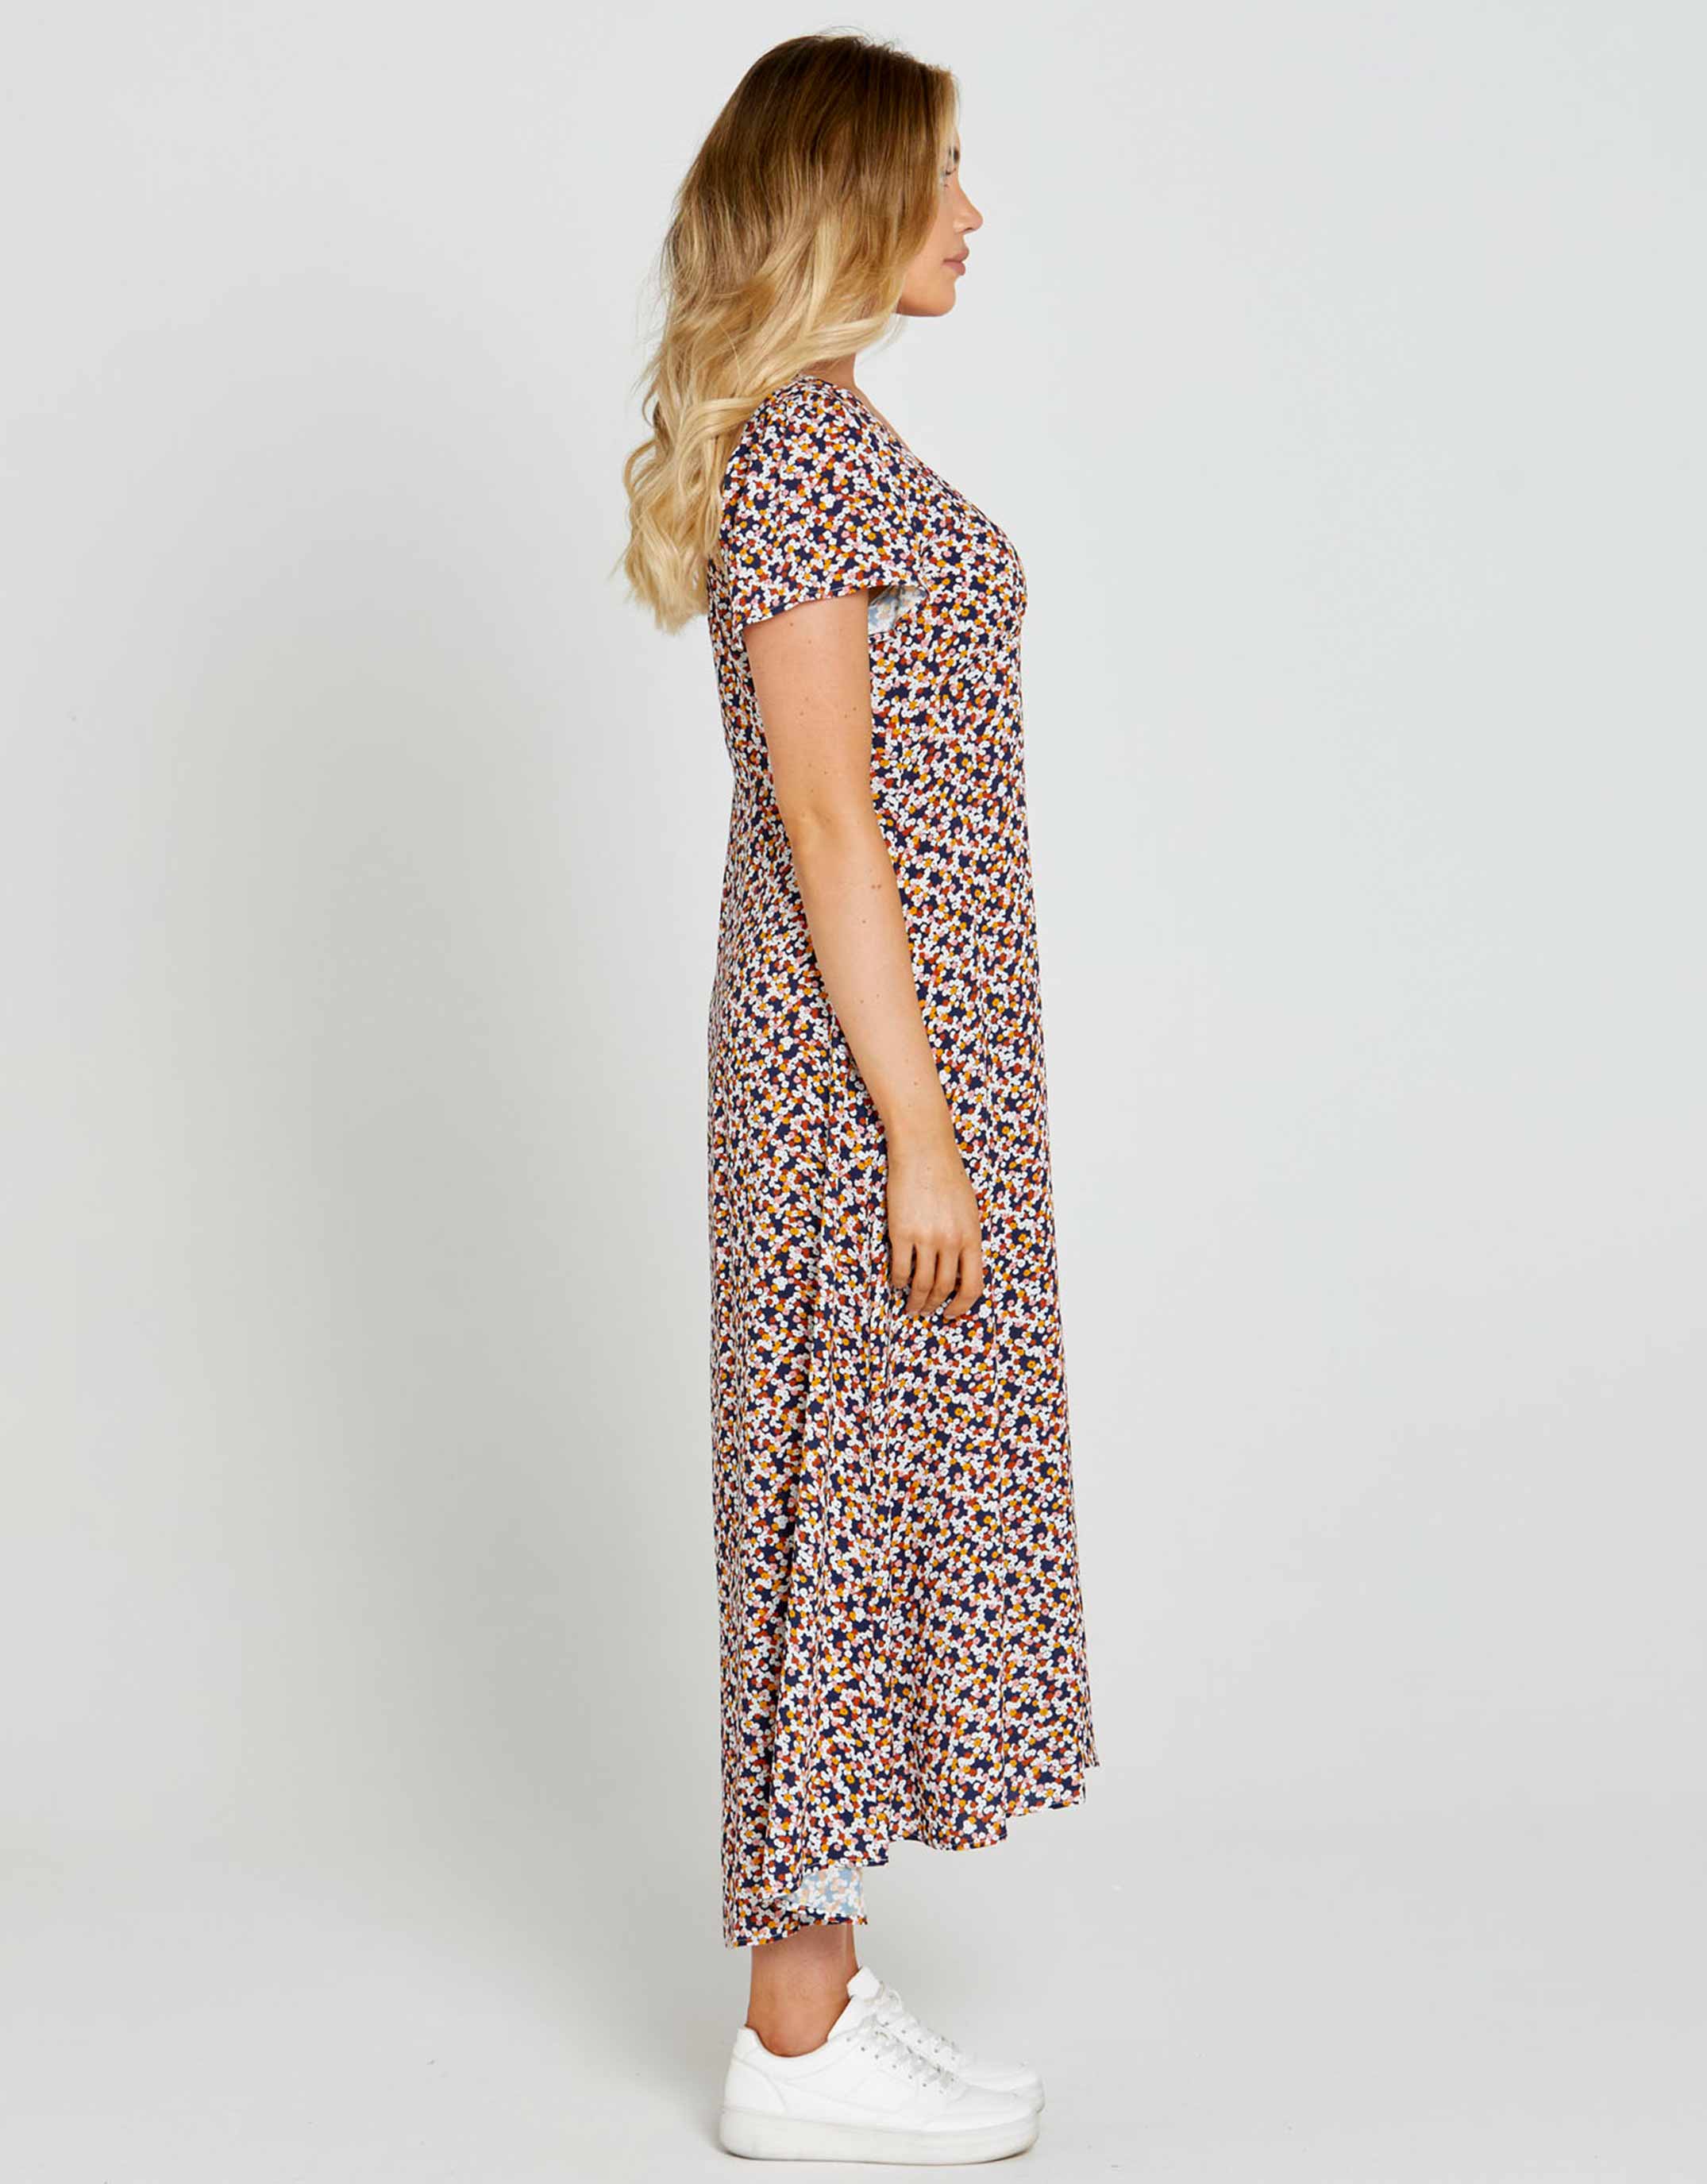 Isobelle Maxi Dress - Navy Floral Ditsy